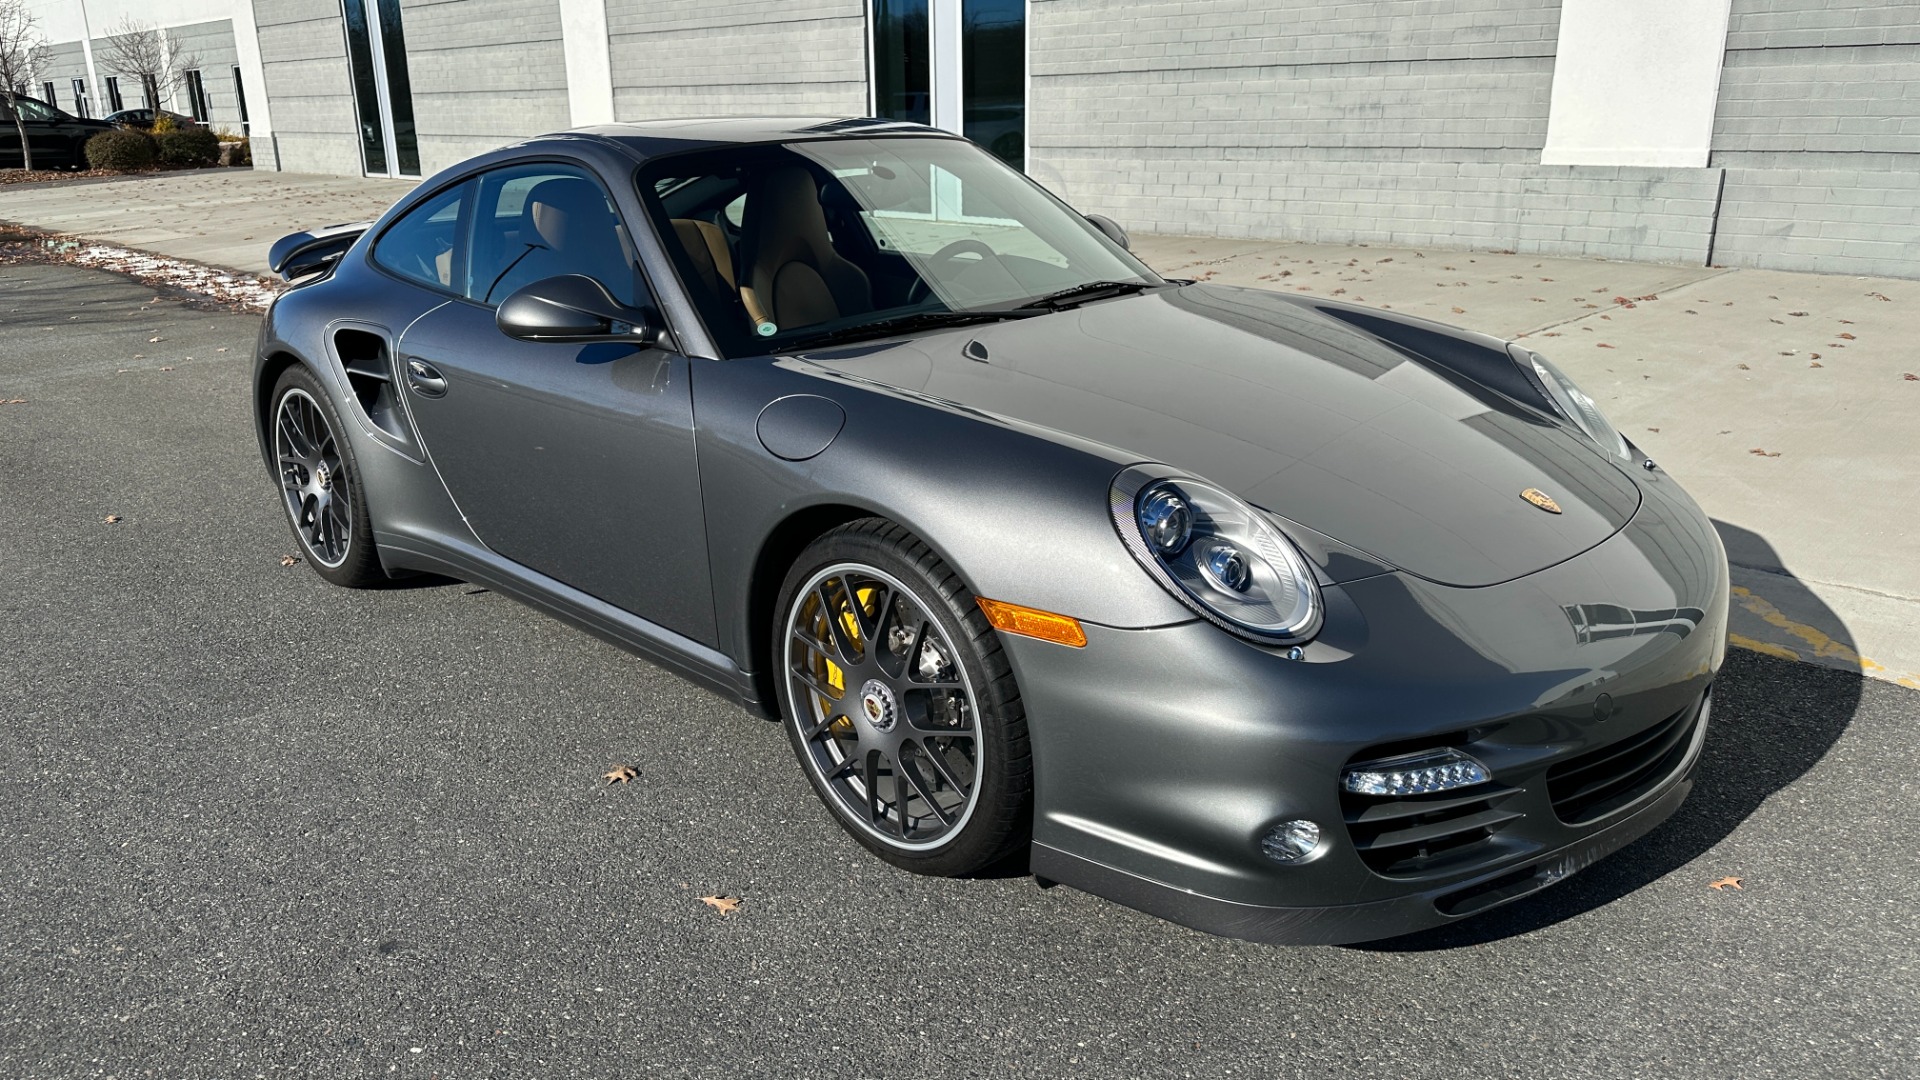 Used 2012 Porsche 911 TURBO S / CENTER LOCK WHEELS / FULL LEATHER INTERIOR / YELLOW CALIPERS / PA for sale $138,999 at Formula Imports in Charlotte NC 28227 5